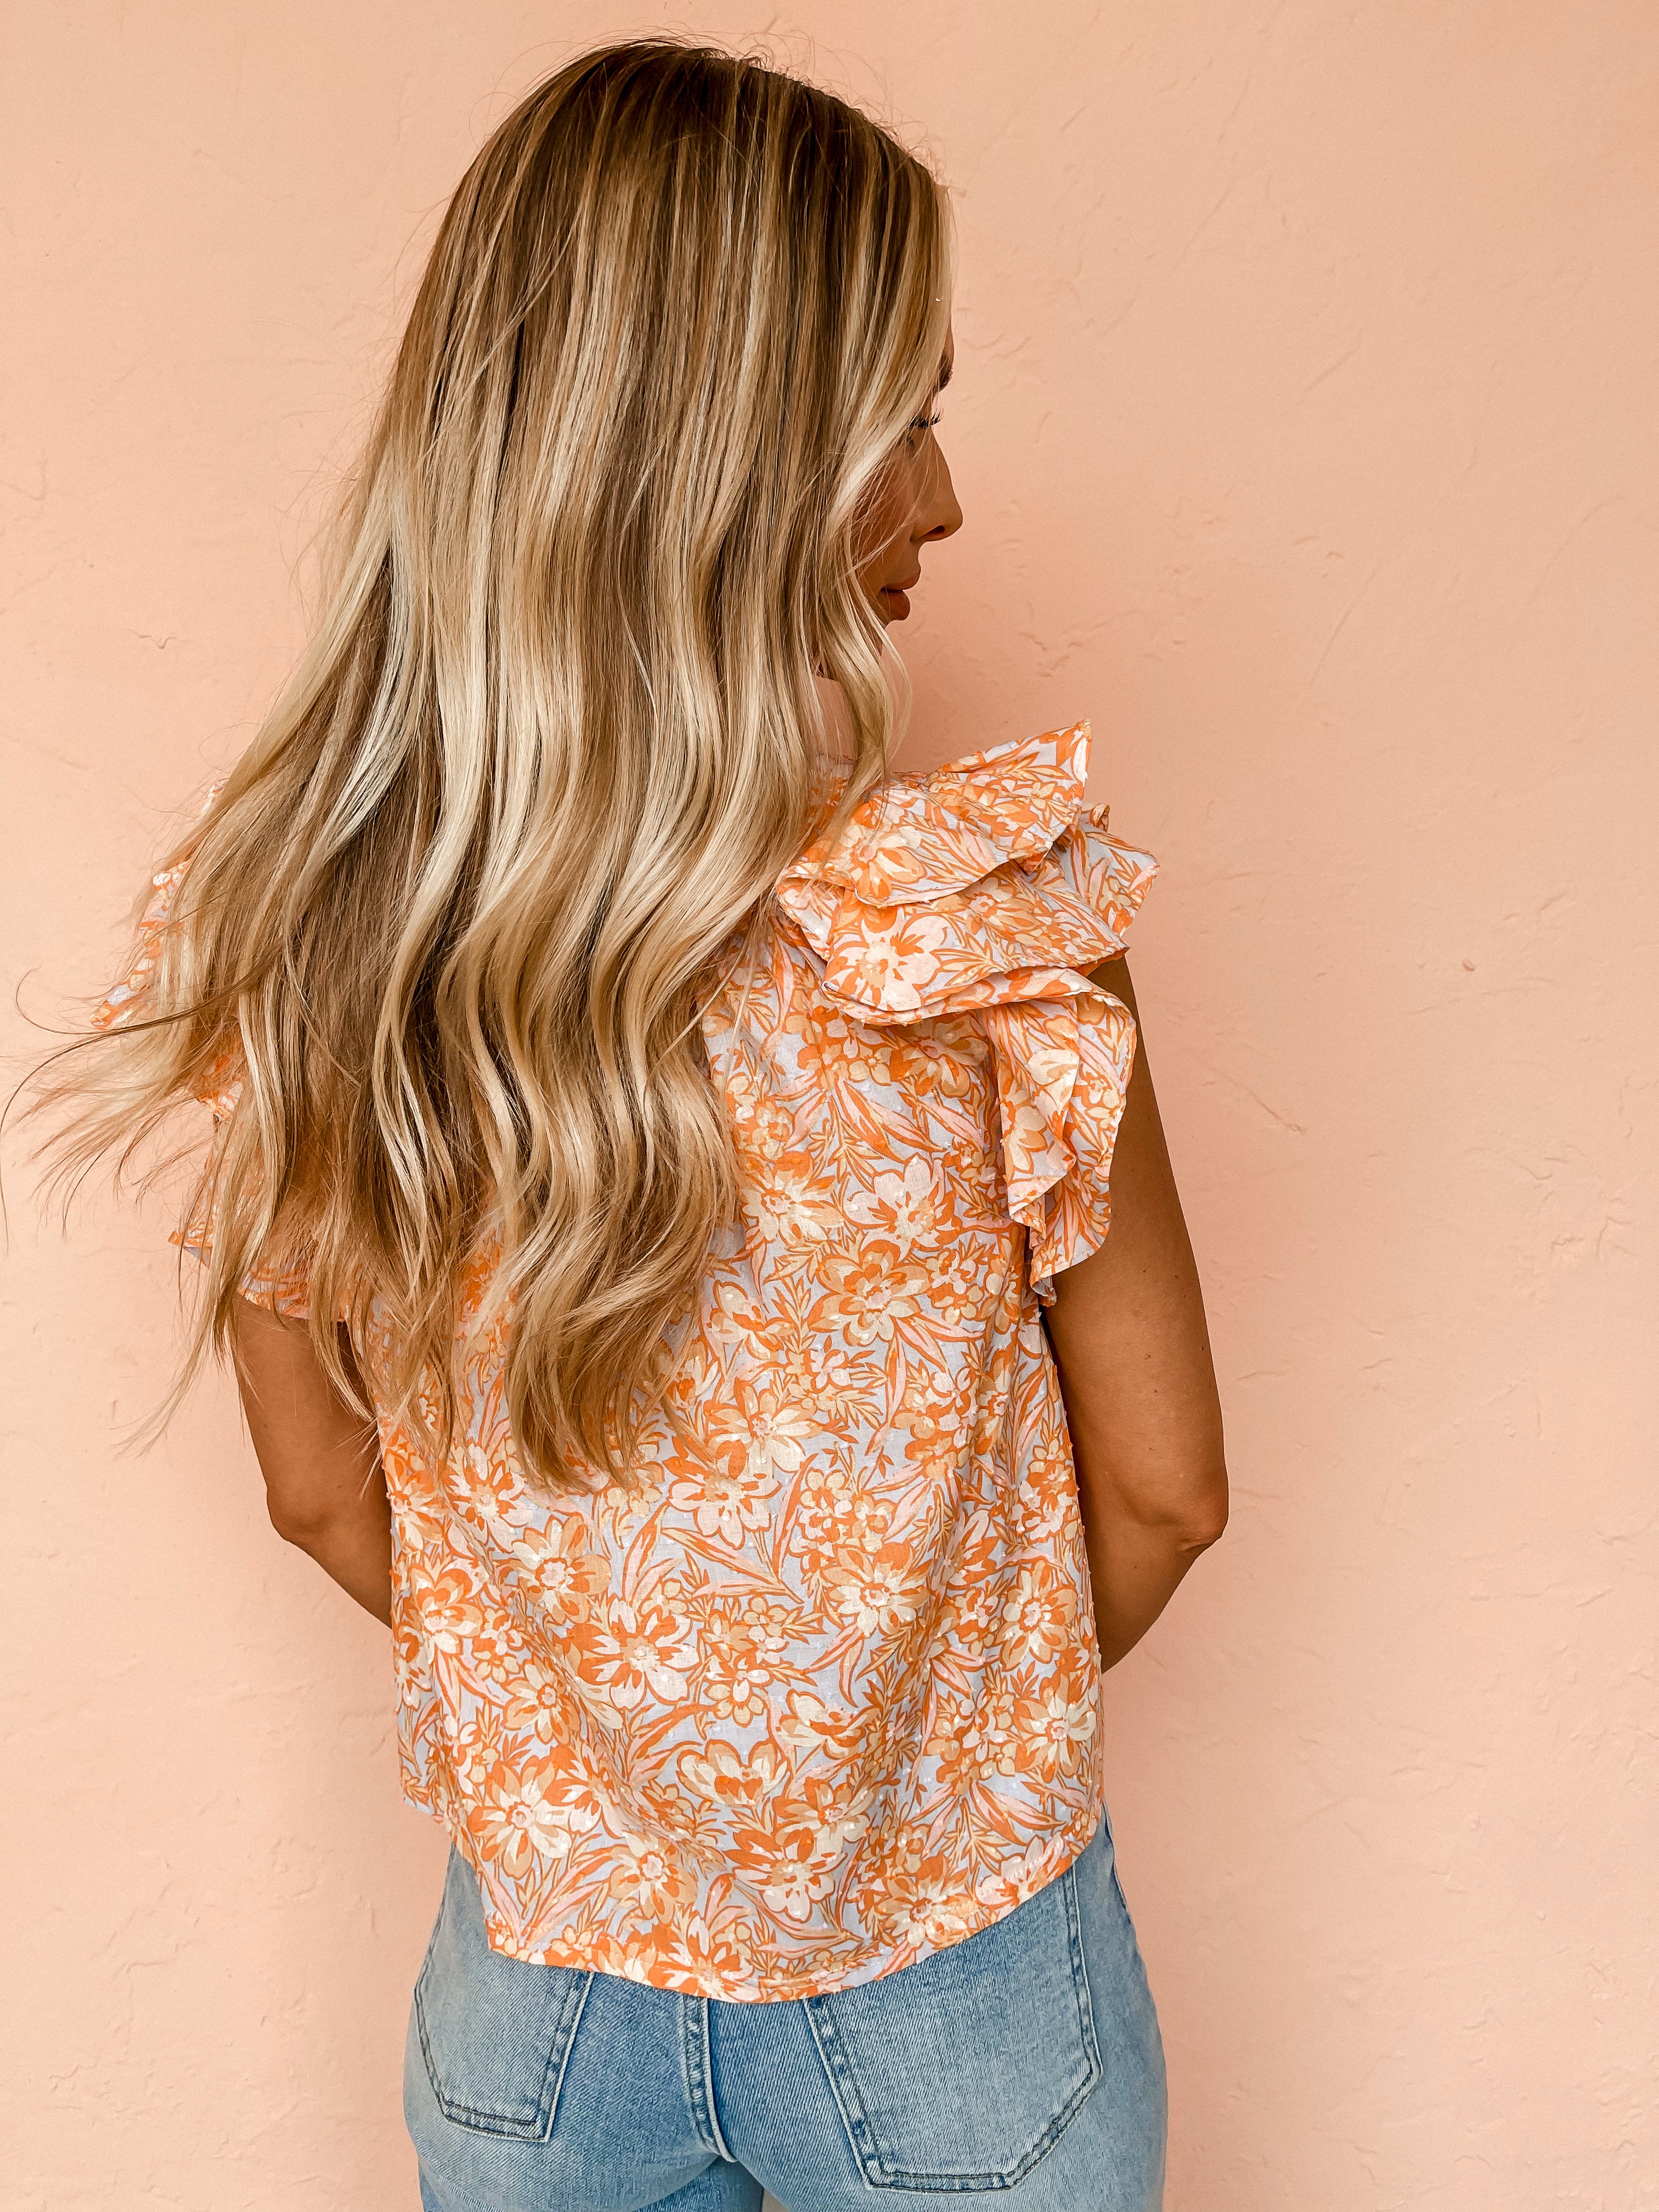 All About Spring Ruffled Sleeve Top